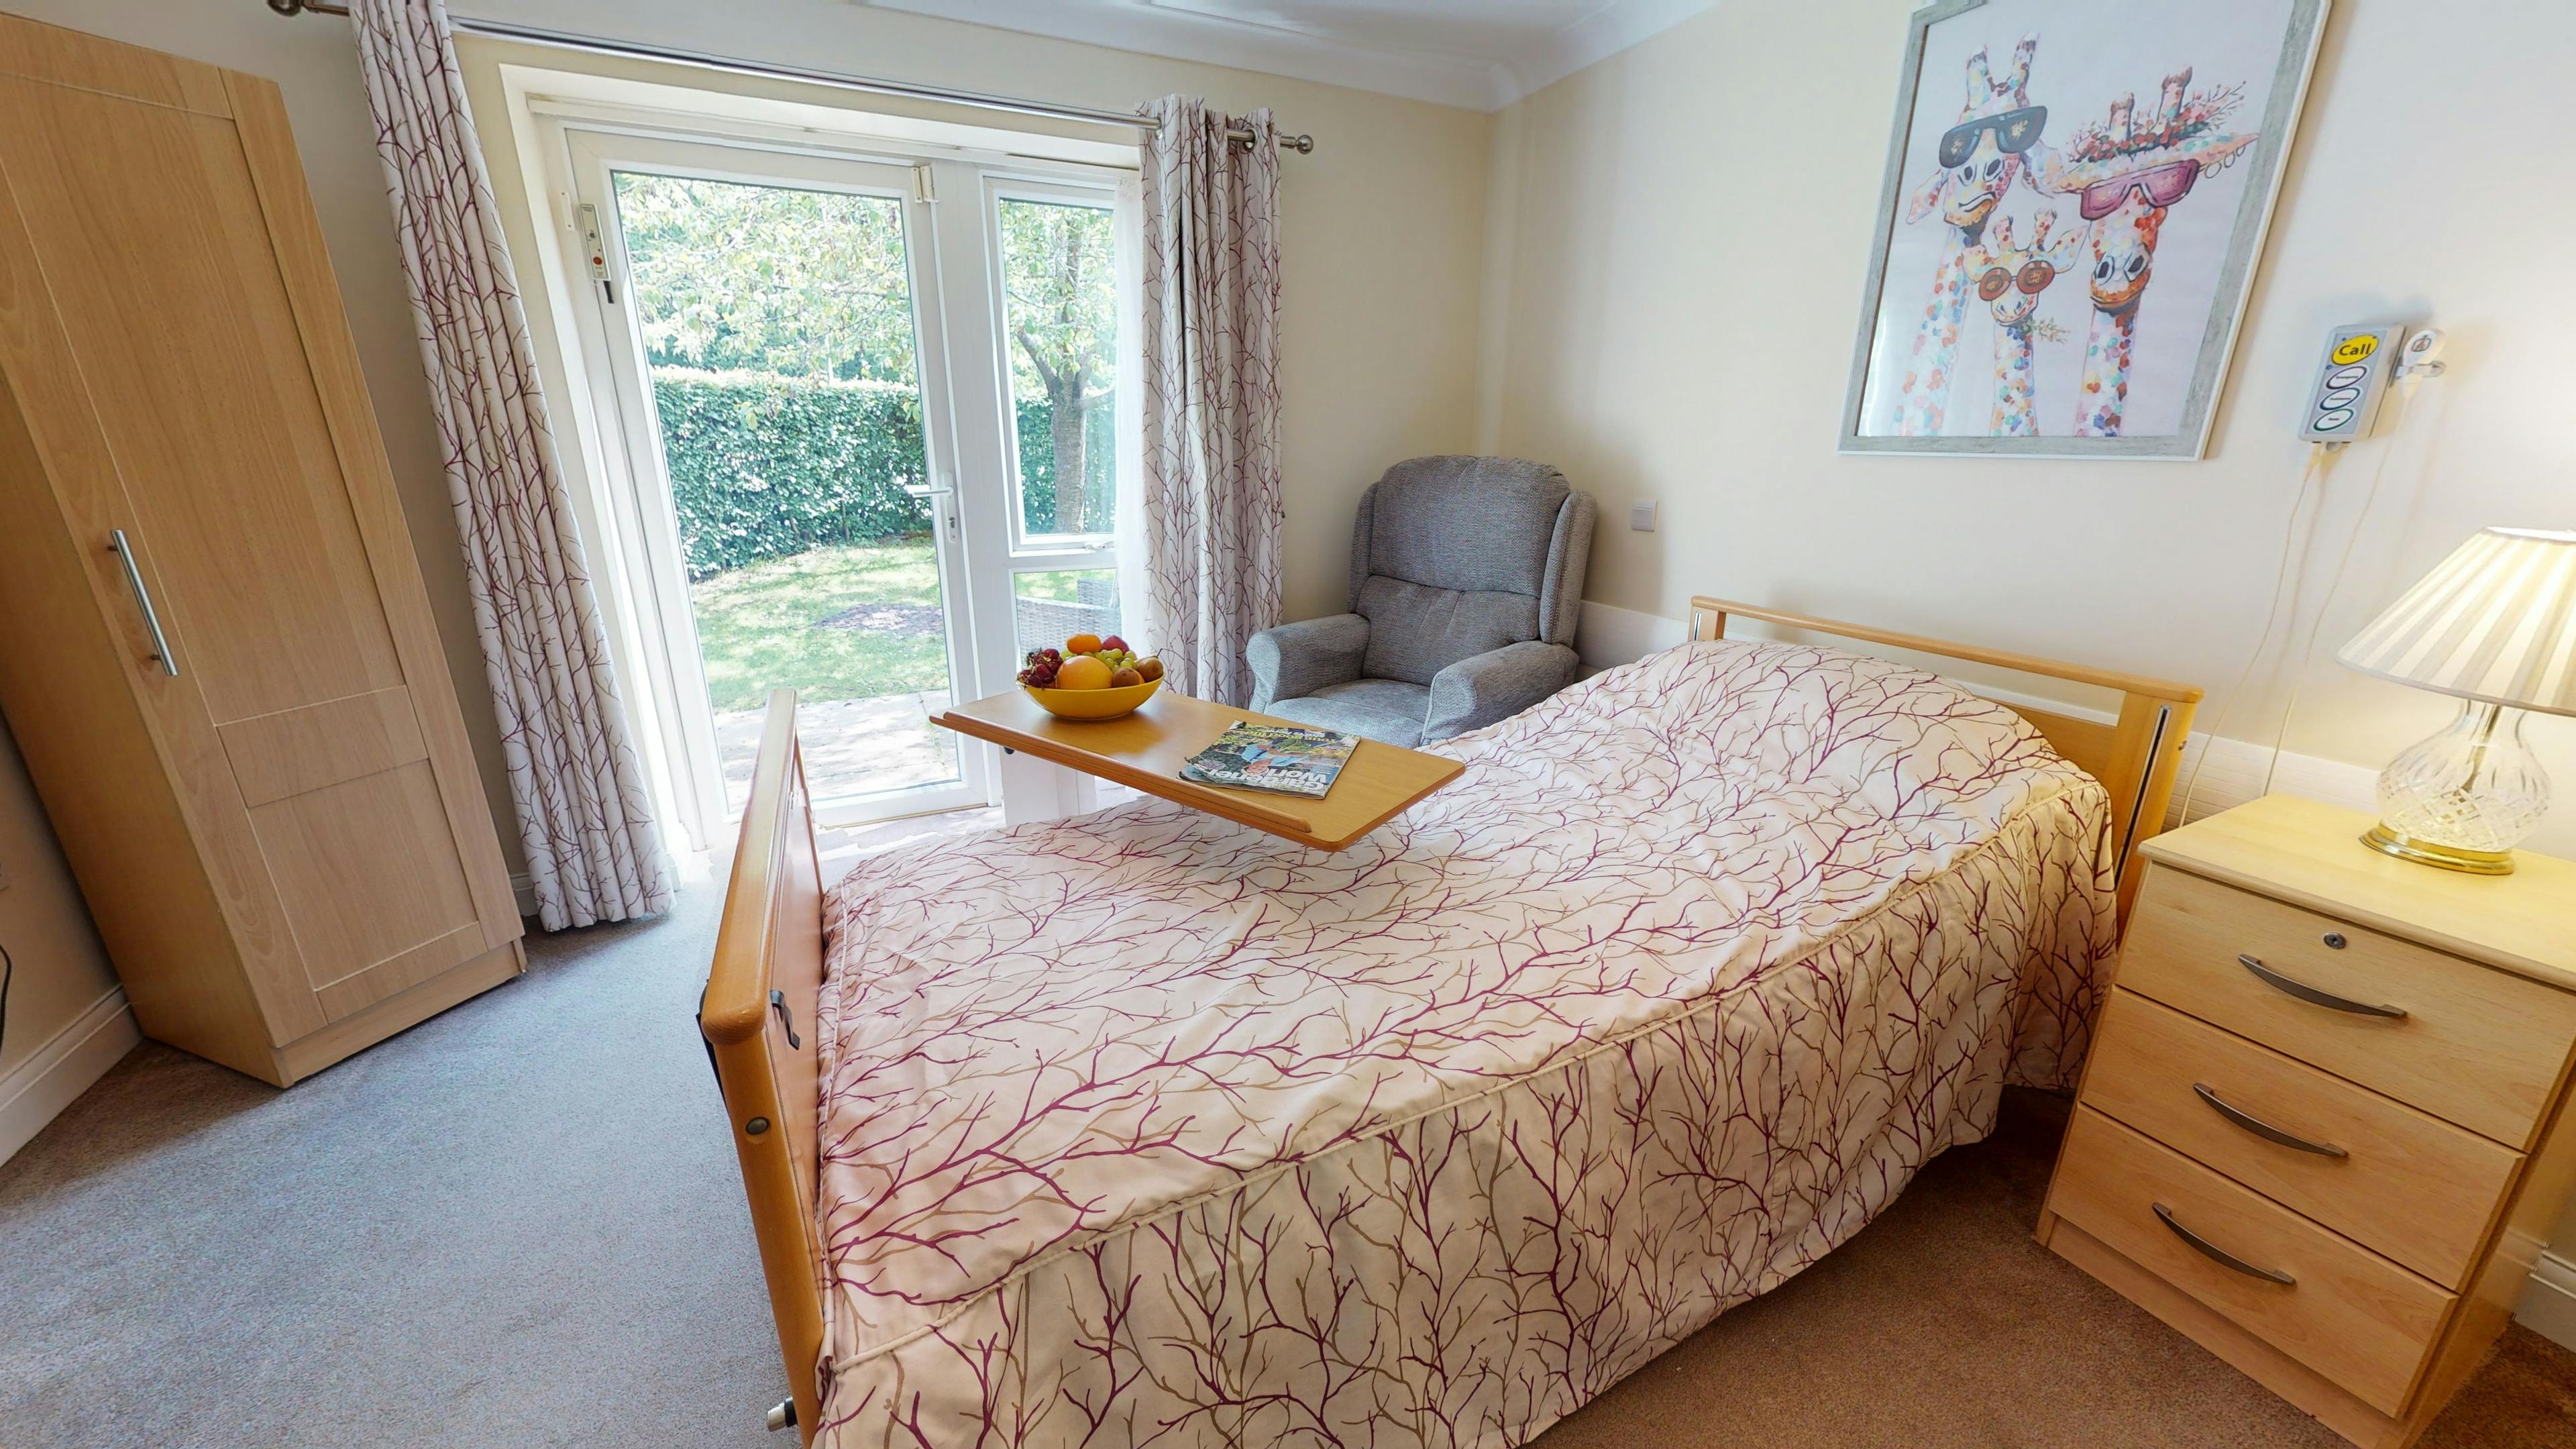 Brendoncare - Brendoncare Knightwood care home 2